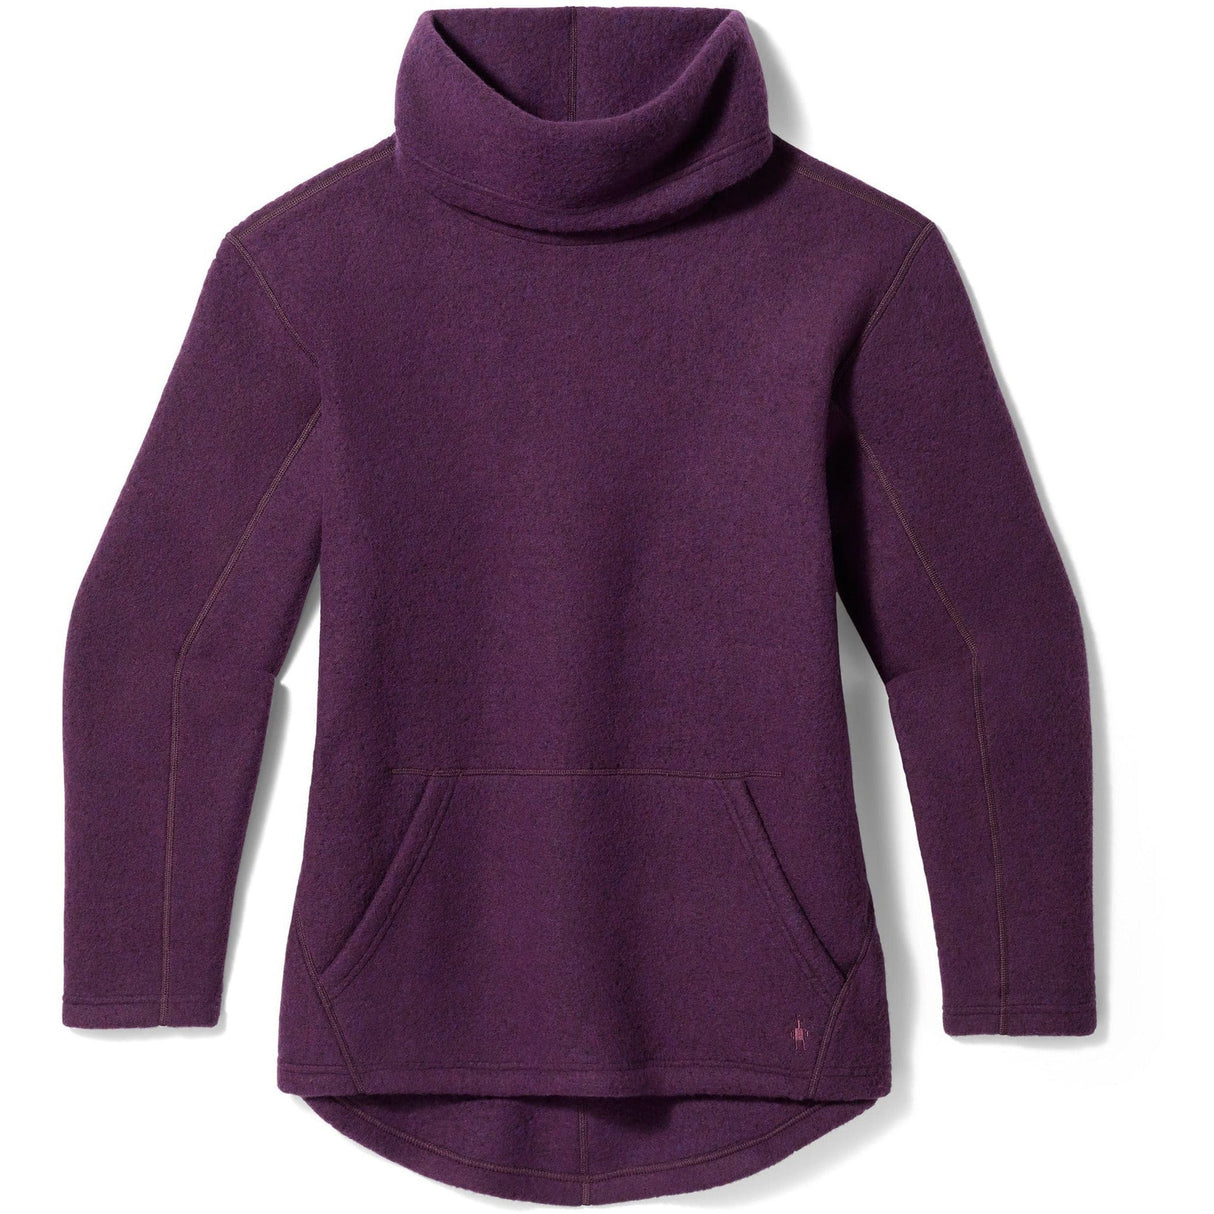 Smartwool Womens Hudson Trail Fleece Pullover  -  Small / Eggplant Heather